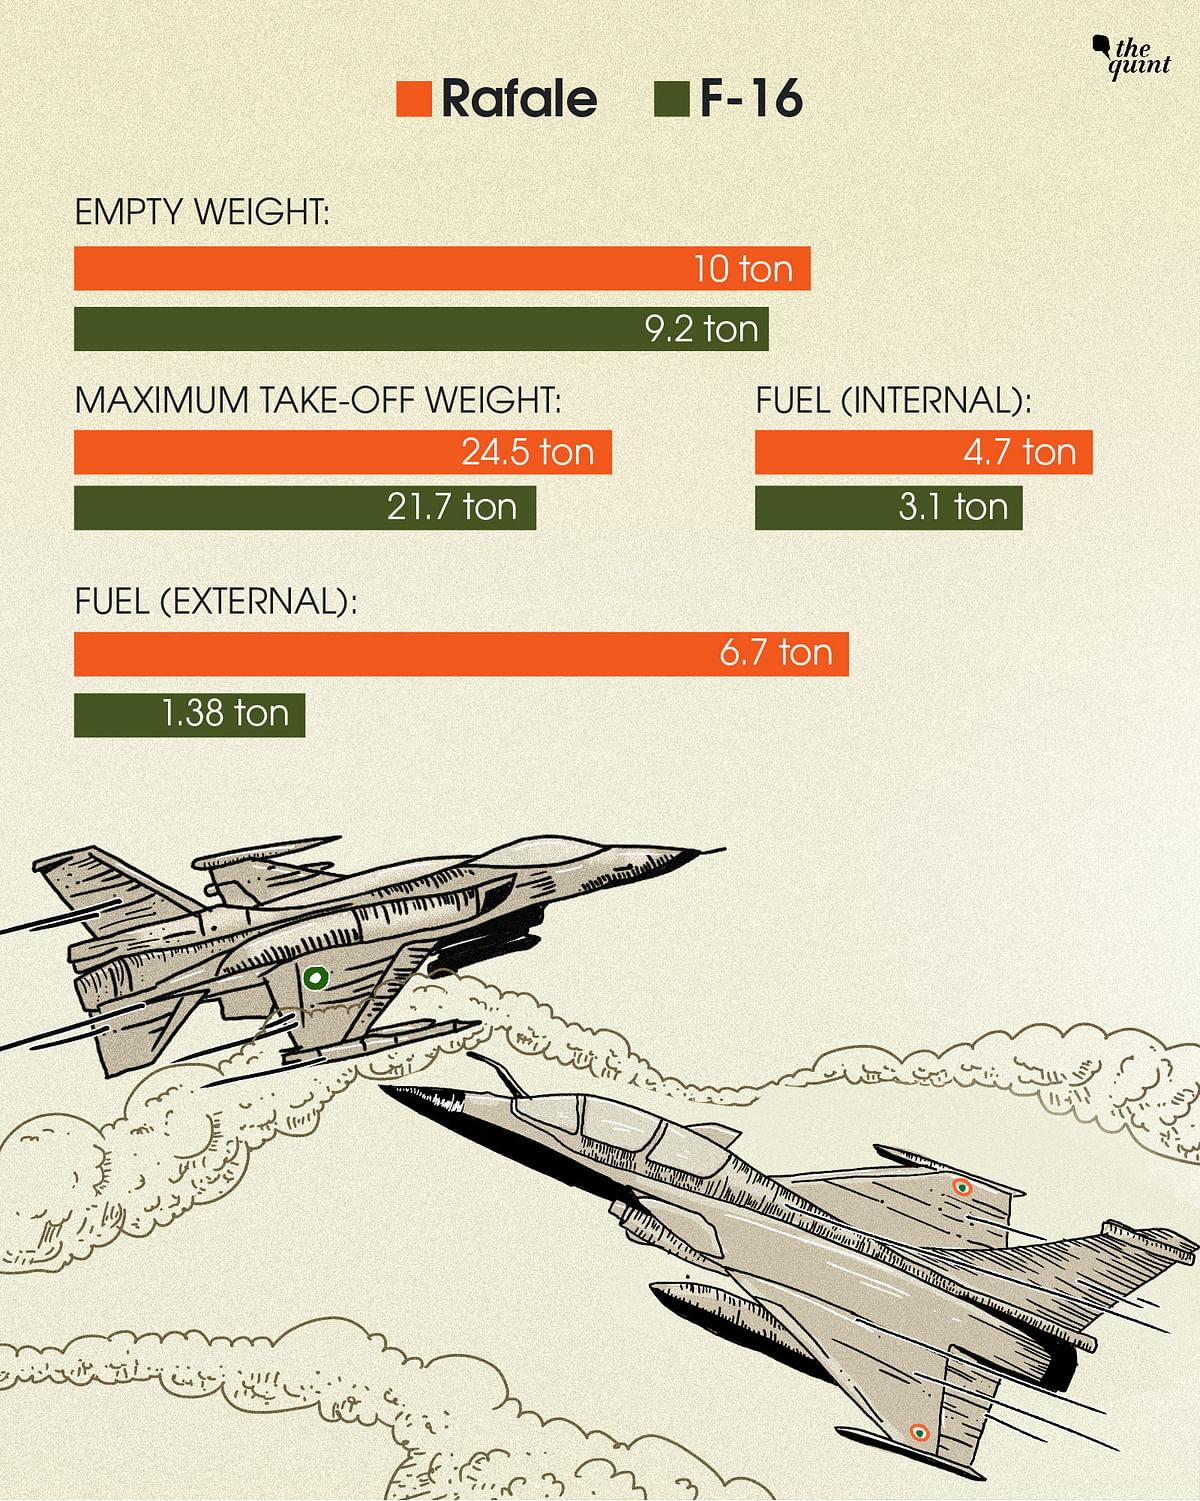  In a face-off which aircraft will have the advantage? Pakistan’s F16 or India’s Rafale? 